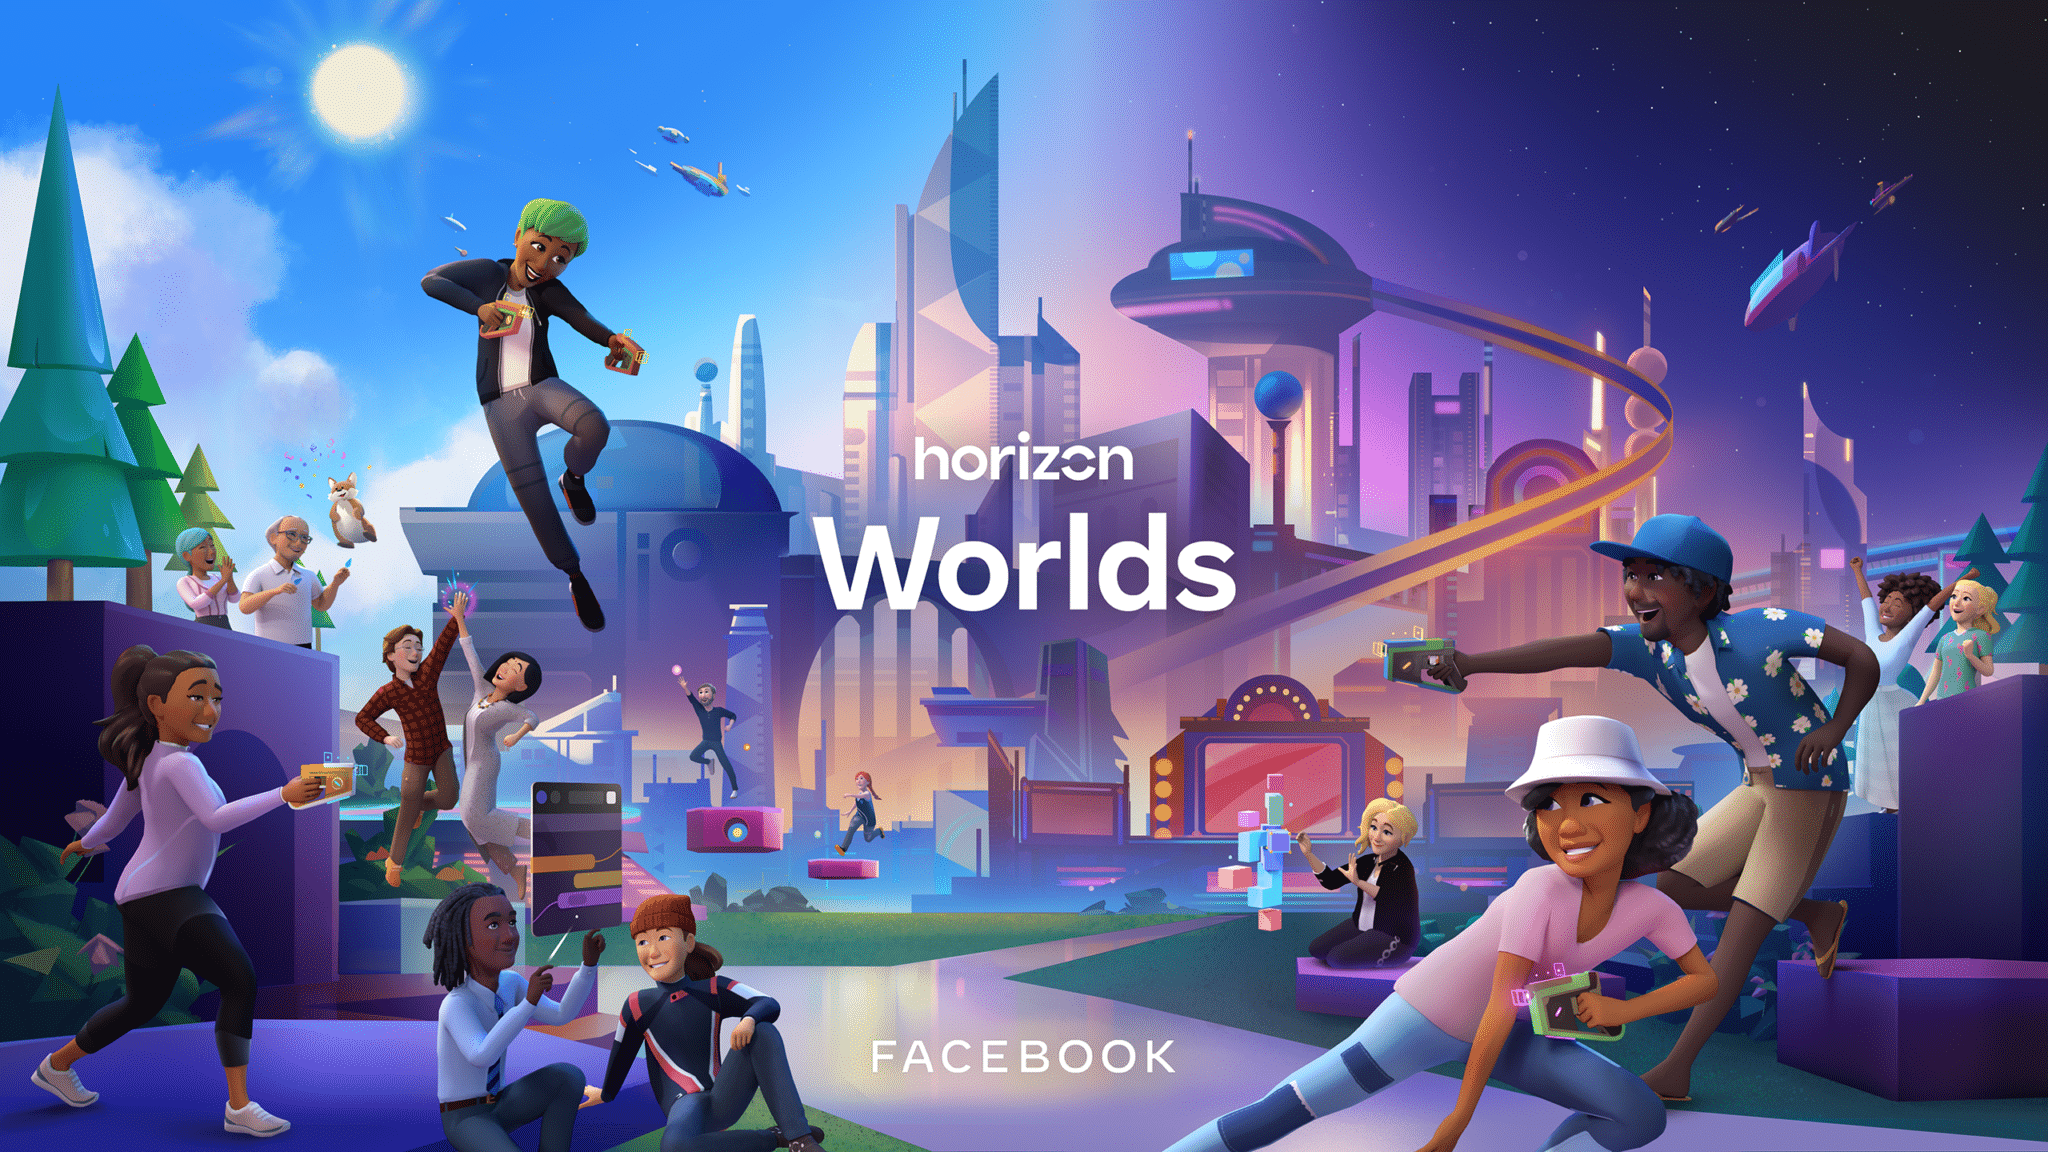 Facebook: The Metaverse is, for the moment, a fiasco, most worlds are never visited